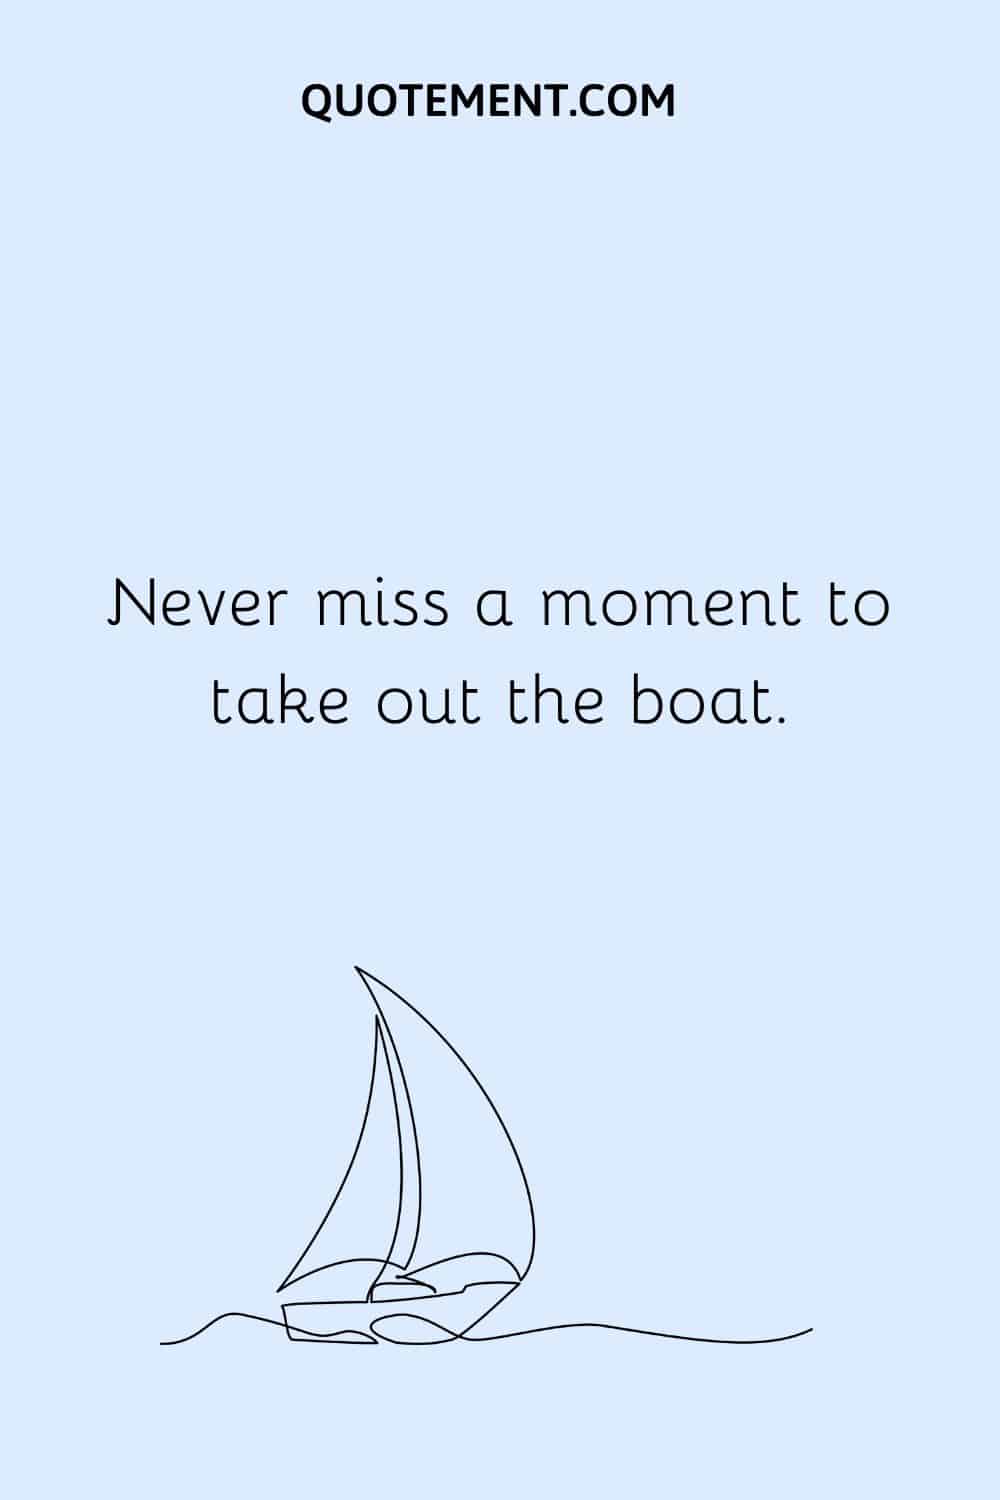  Never miss a moment to take out the boat